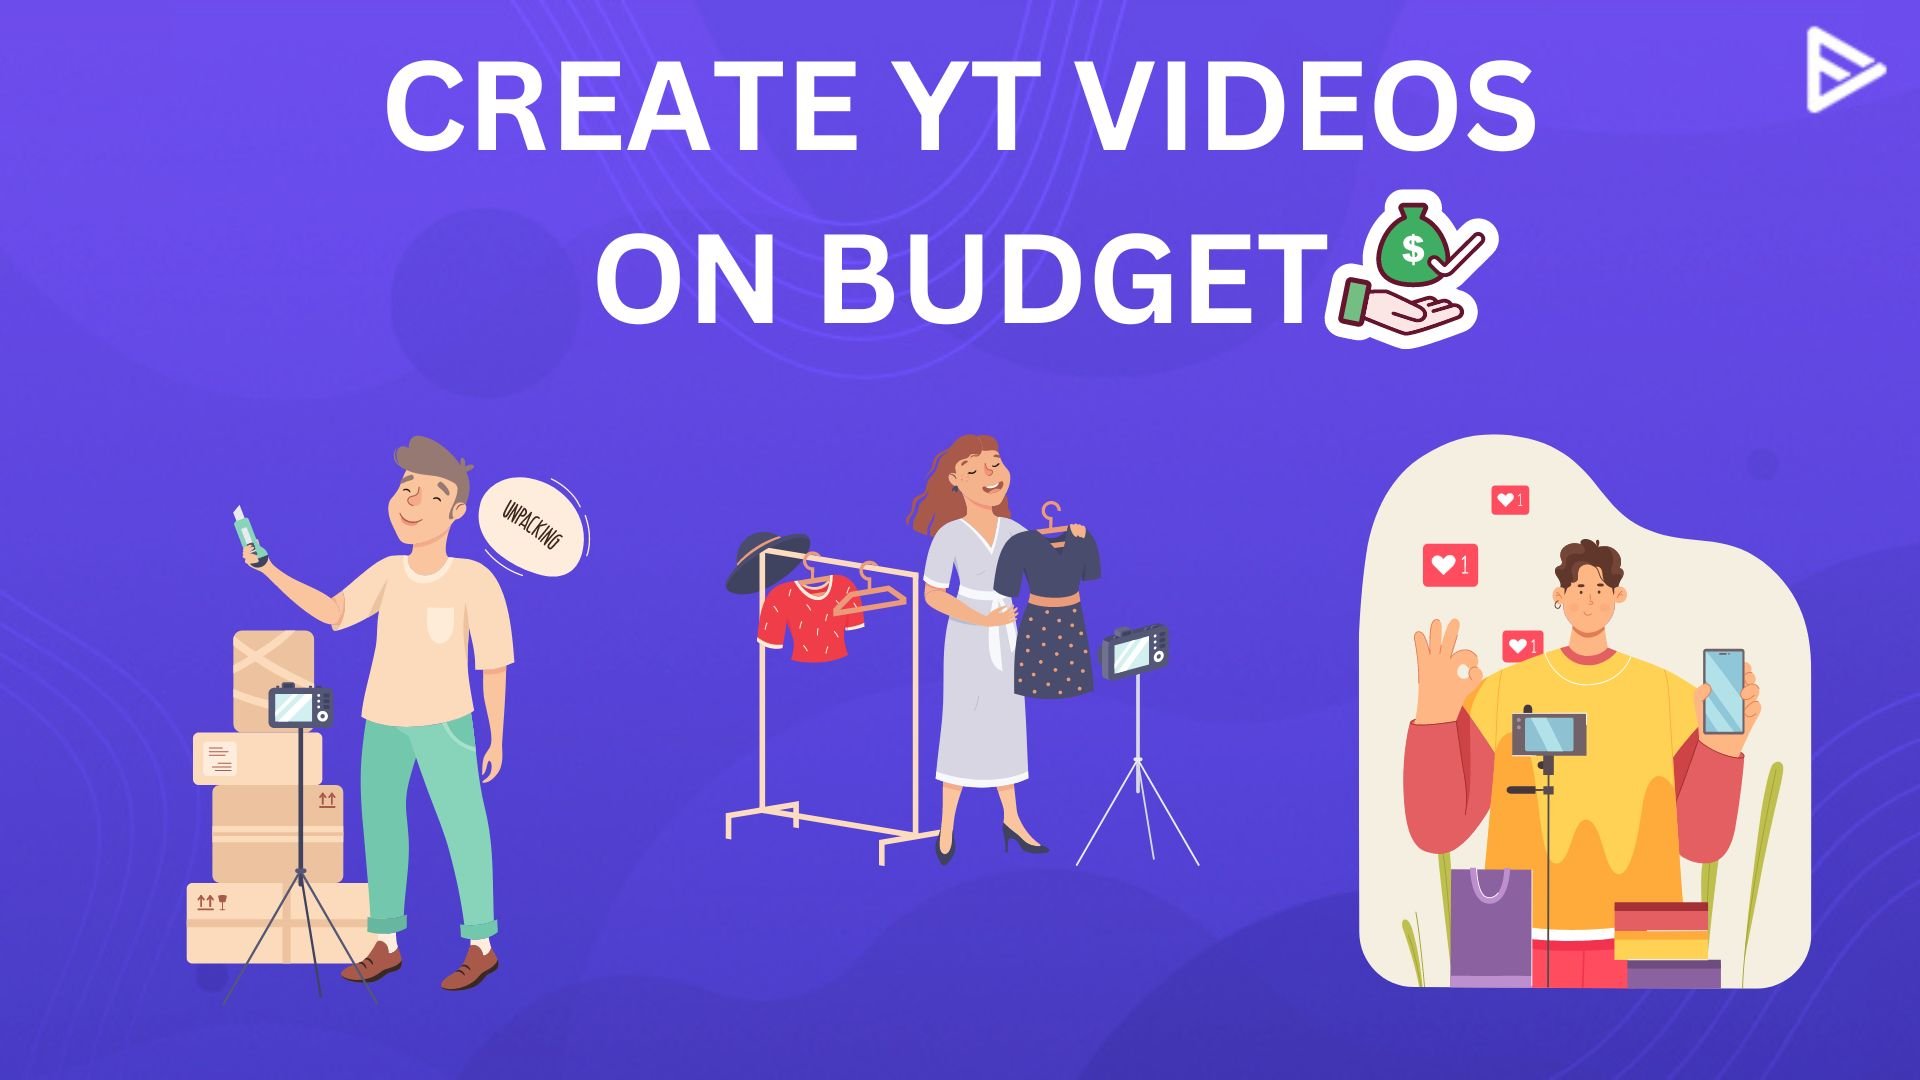 BUDGET YOUTUBE VIDEOS